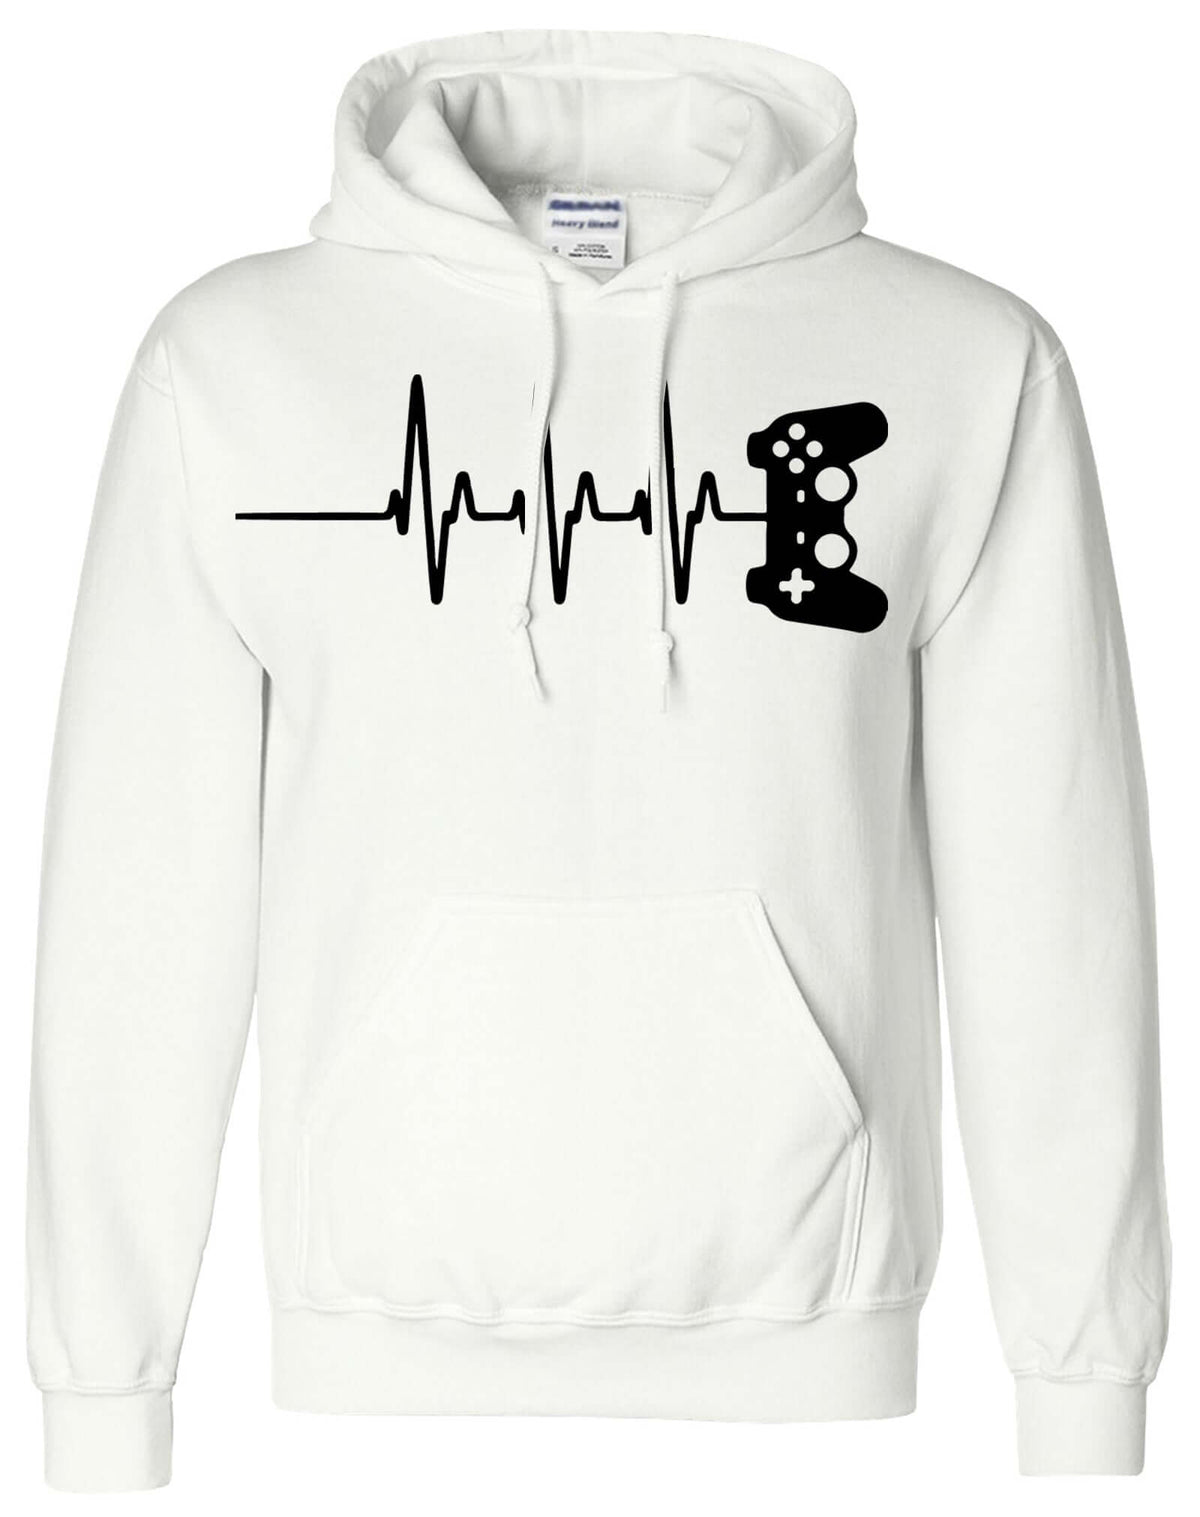 Gamer Heartbeat Video Game Lover Funny Hoodie